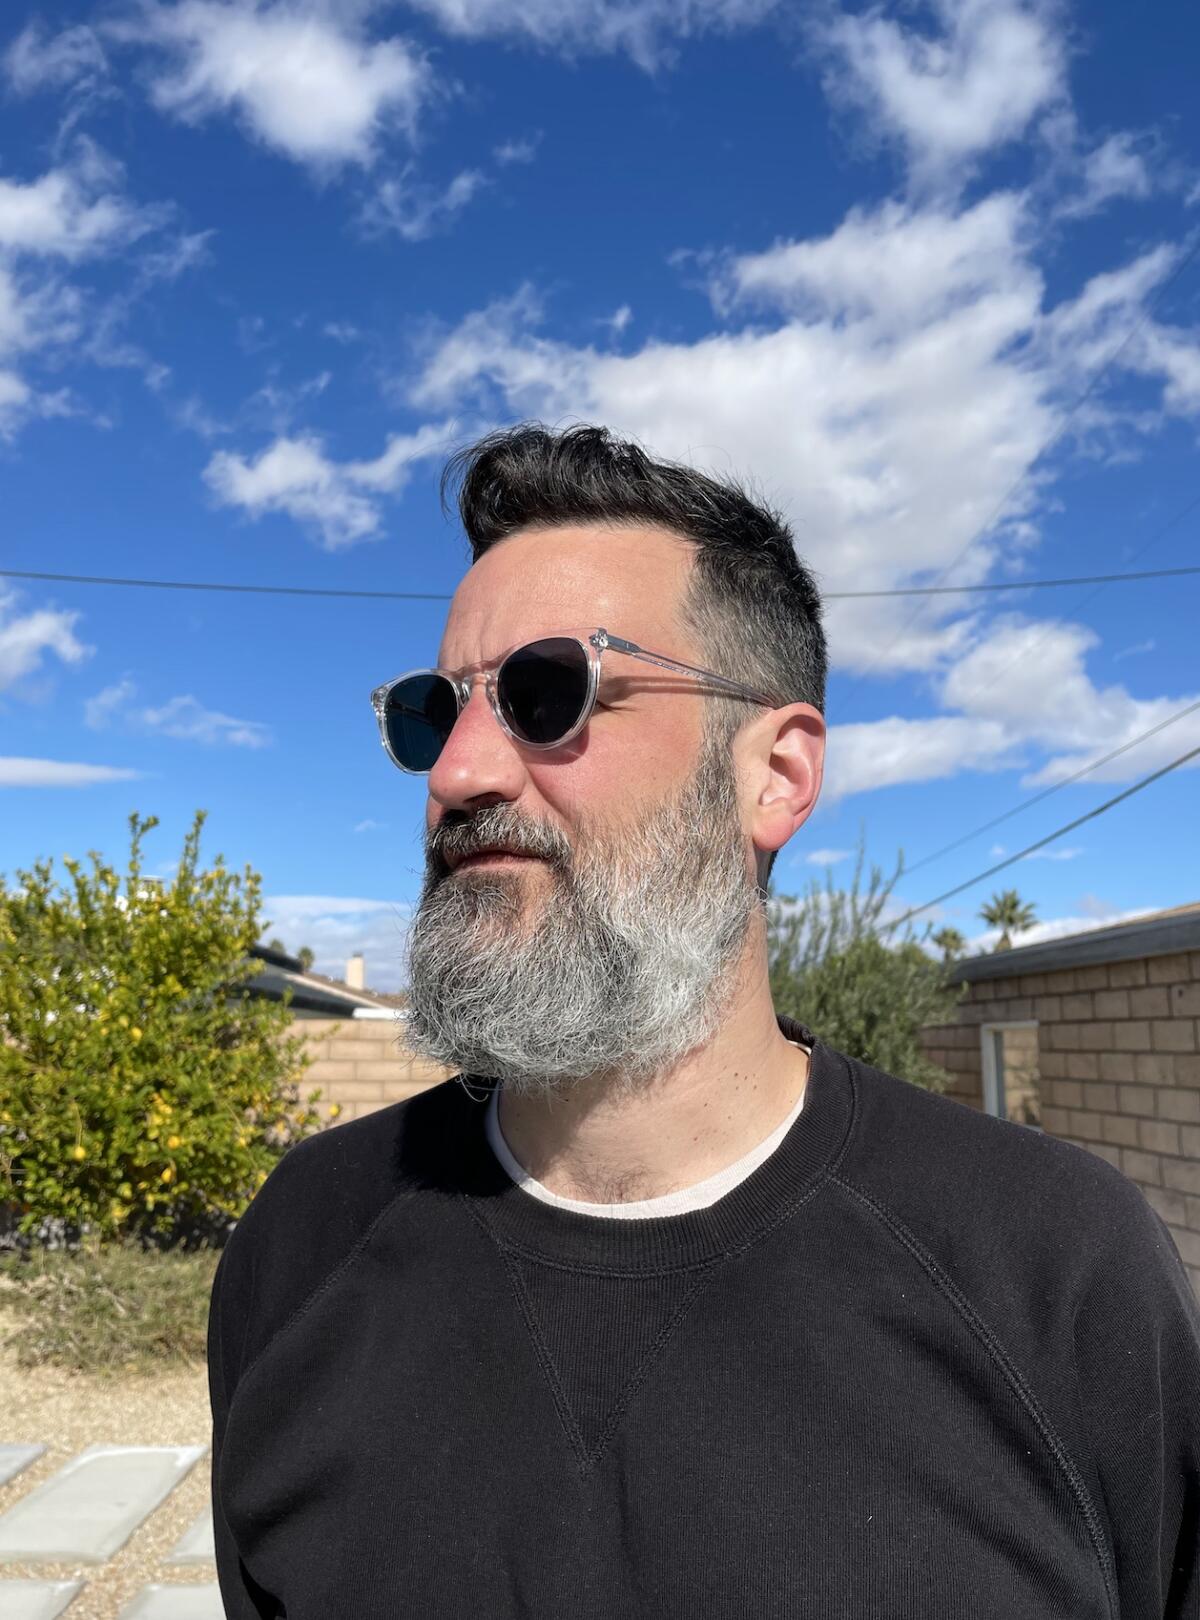 Man with a robust salt and pepper beard looking into the distance against a blue sky.